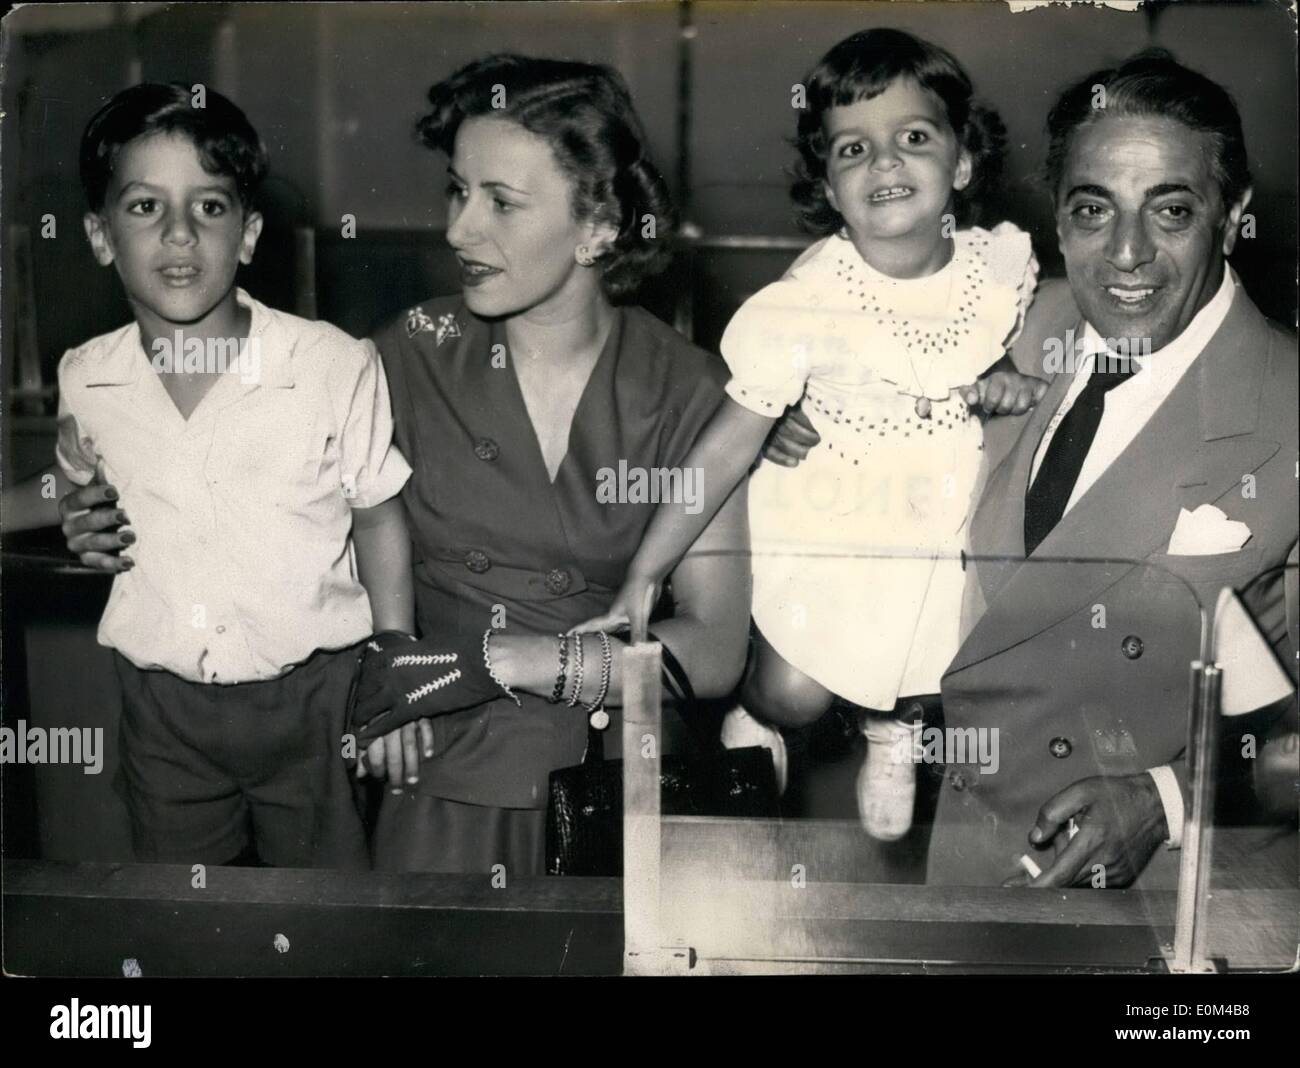 Jul. 25, 1953 - Aristotle Onassis was one of the richest shipping magnates in the world. Here he is pictured with: Alexander(5), wife Athina(25), and Christine(2). Actress Sophia Loren with Marc Bohan's Models Stock Photo